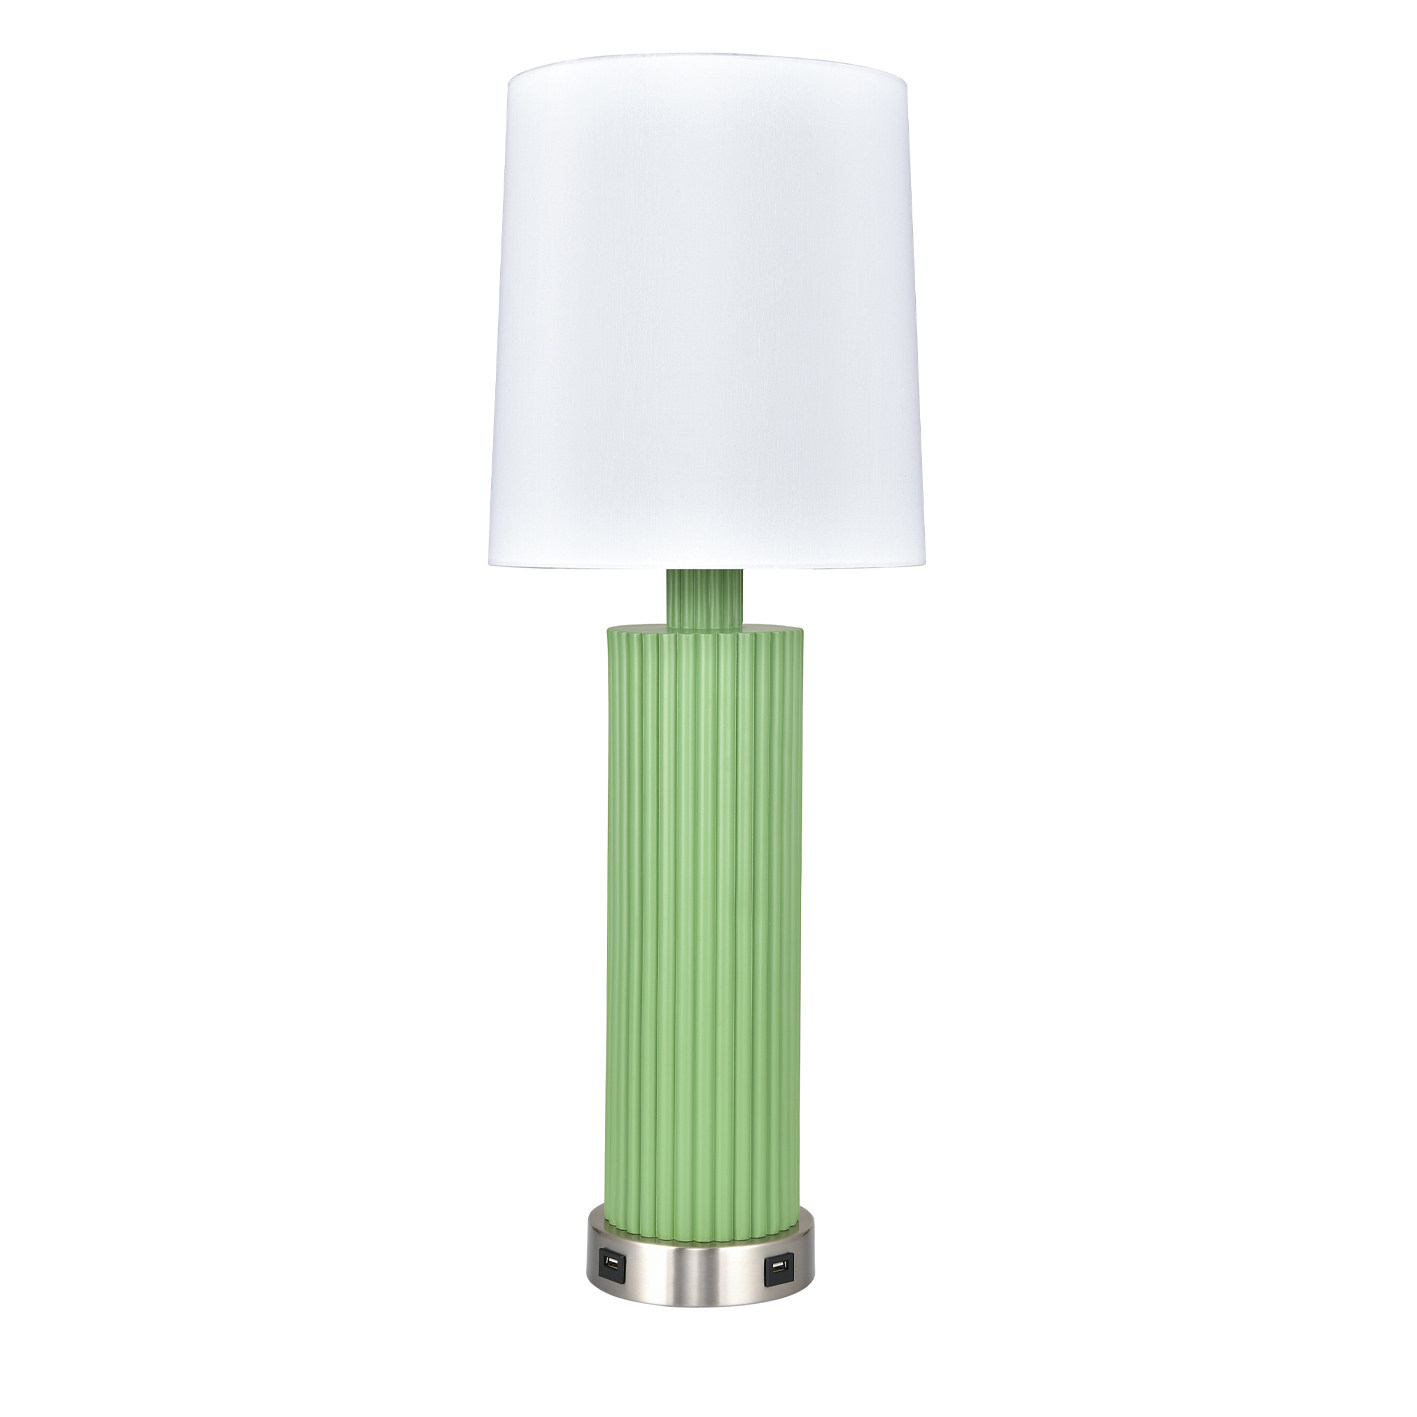 Table Lamp Green With two USB